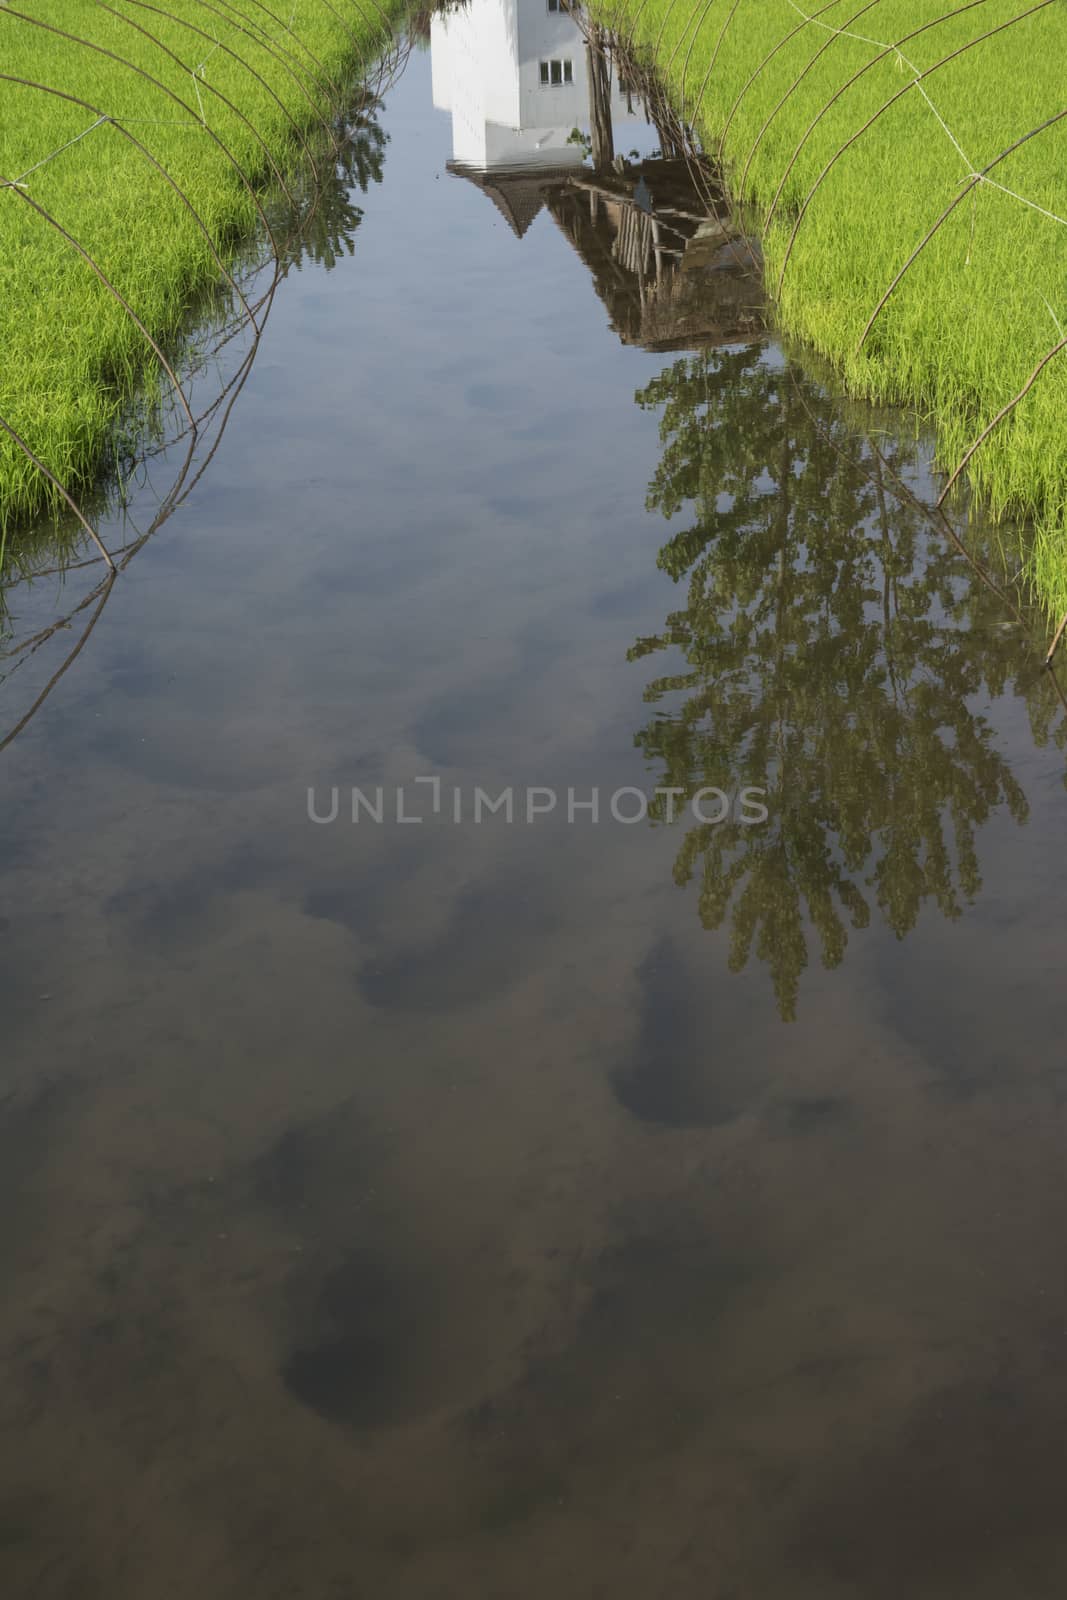 Reflection of modern and traditional architecture on rice farm water.